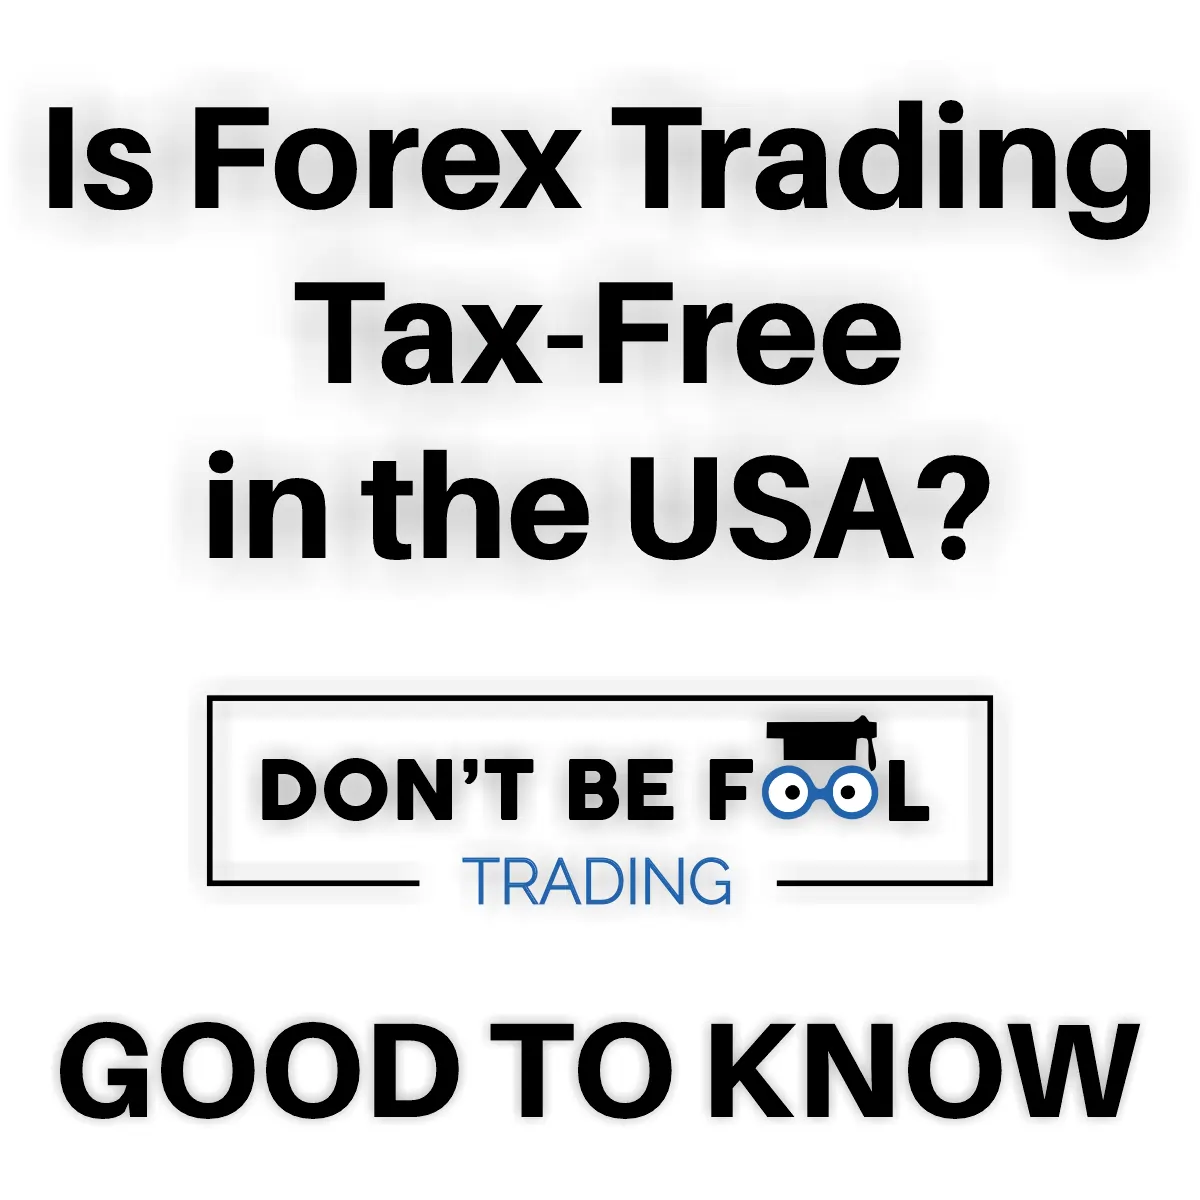 Is Forex Trading Tax Free in the USA question text with dont be fool logo and below text good to know